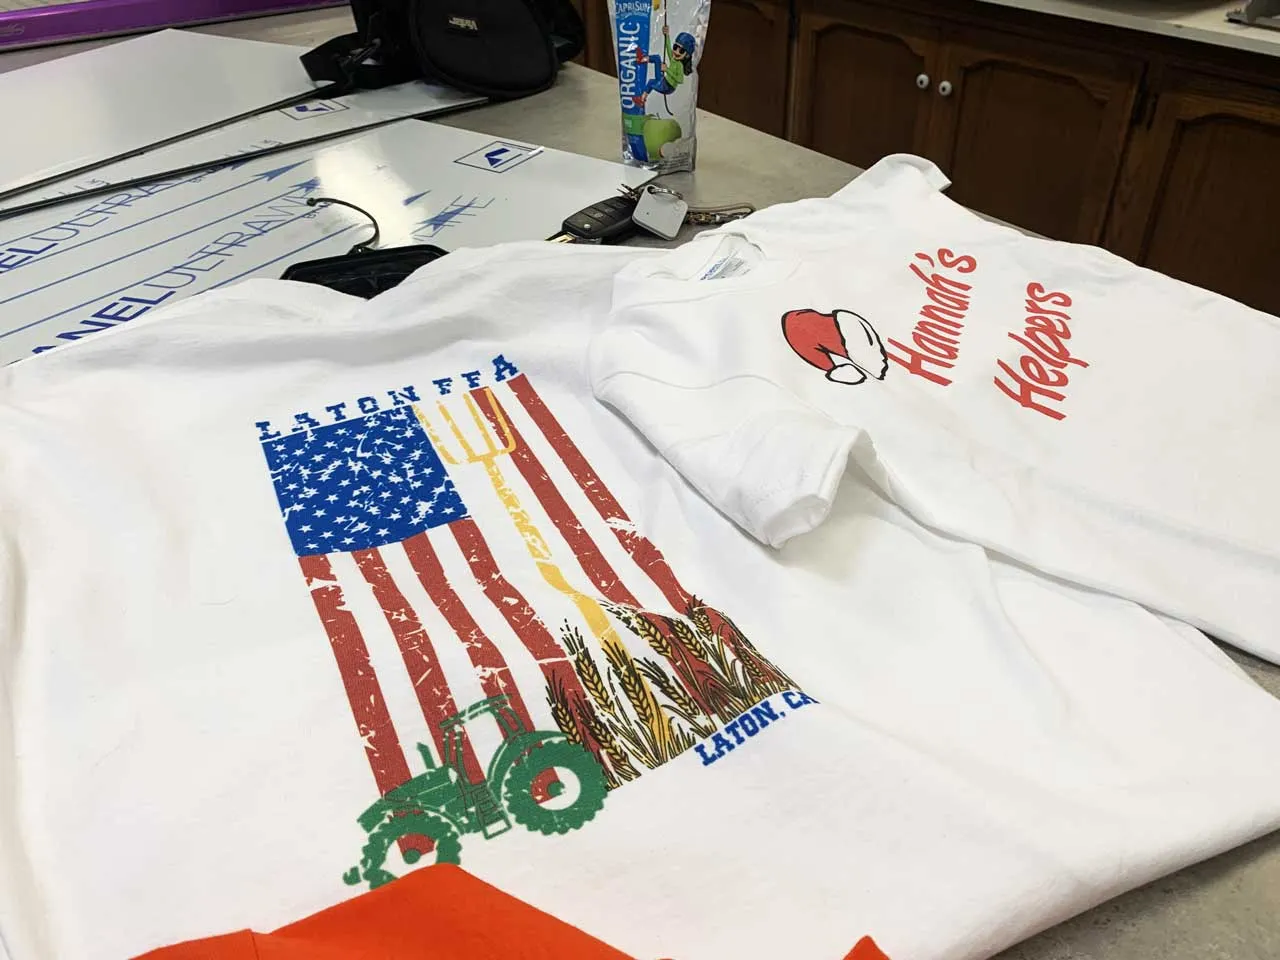 Full Color Printed Shirts near Earlimart